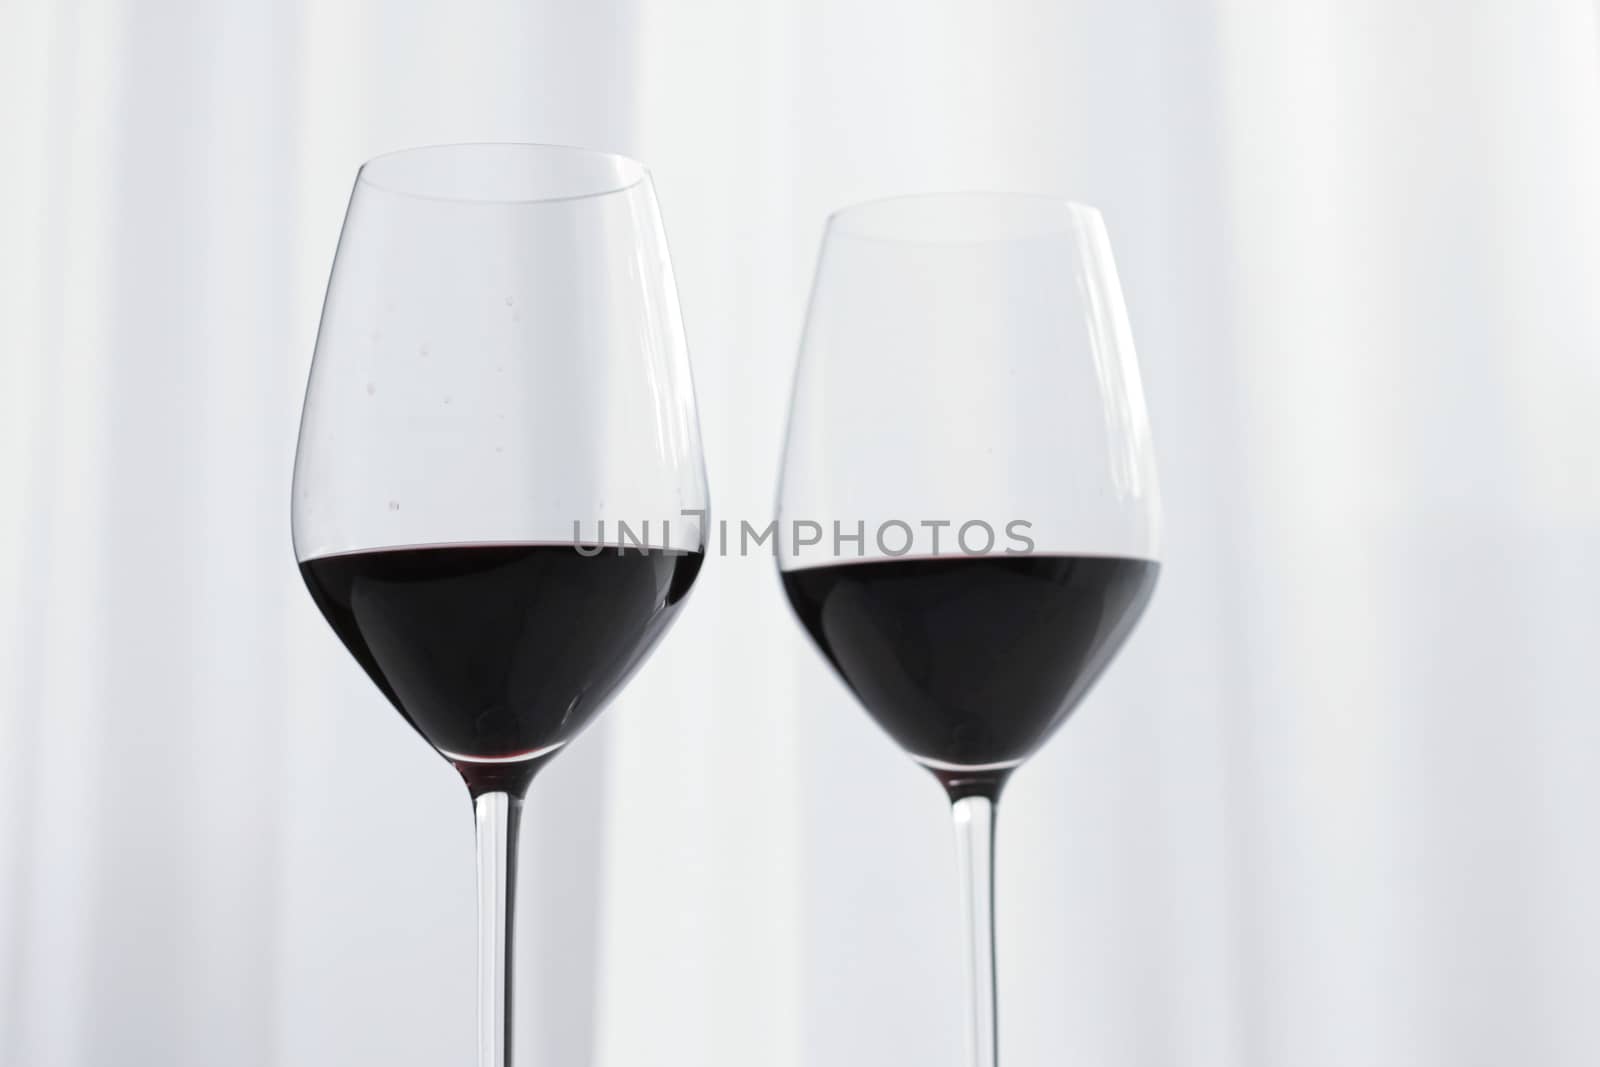 Two crystal glasses of red wine, organic beverage product